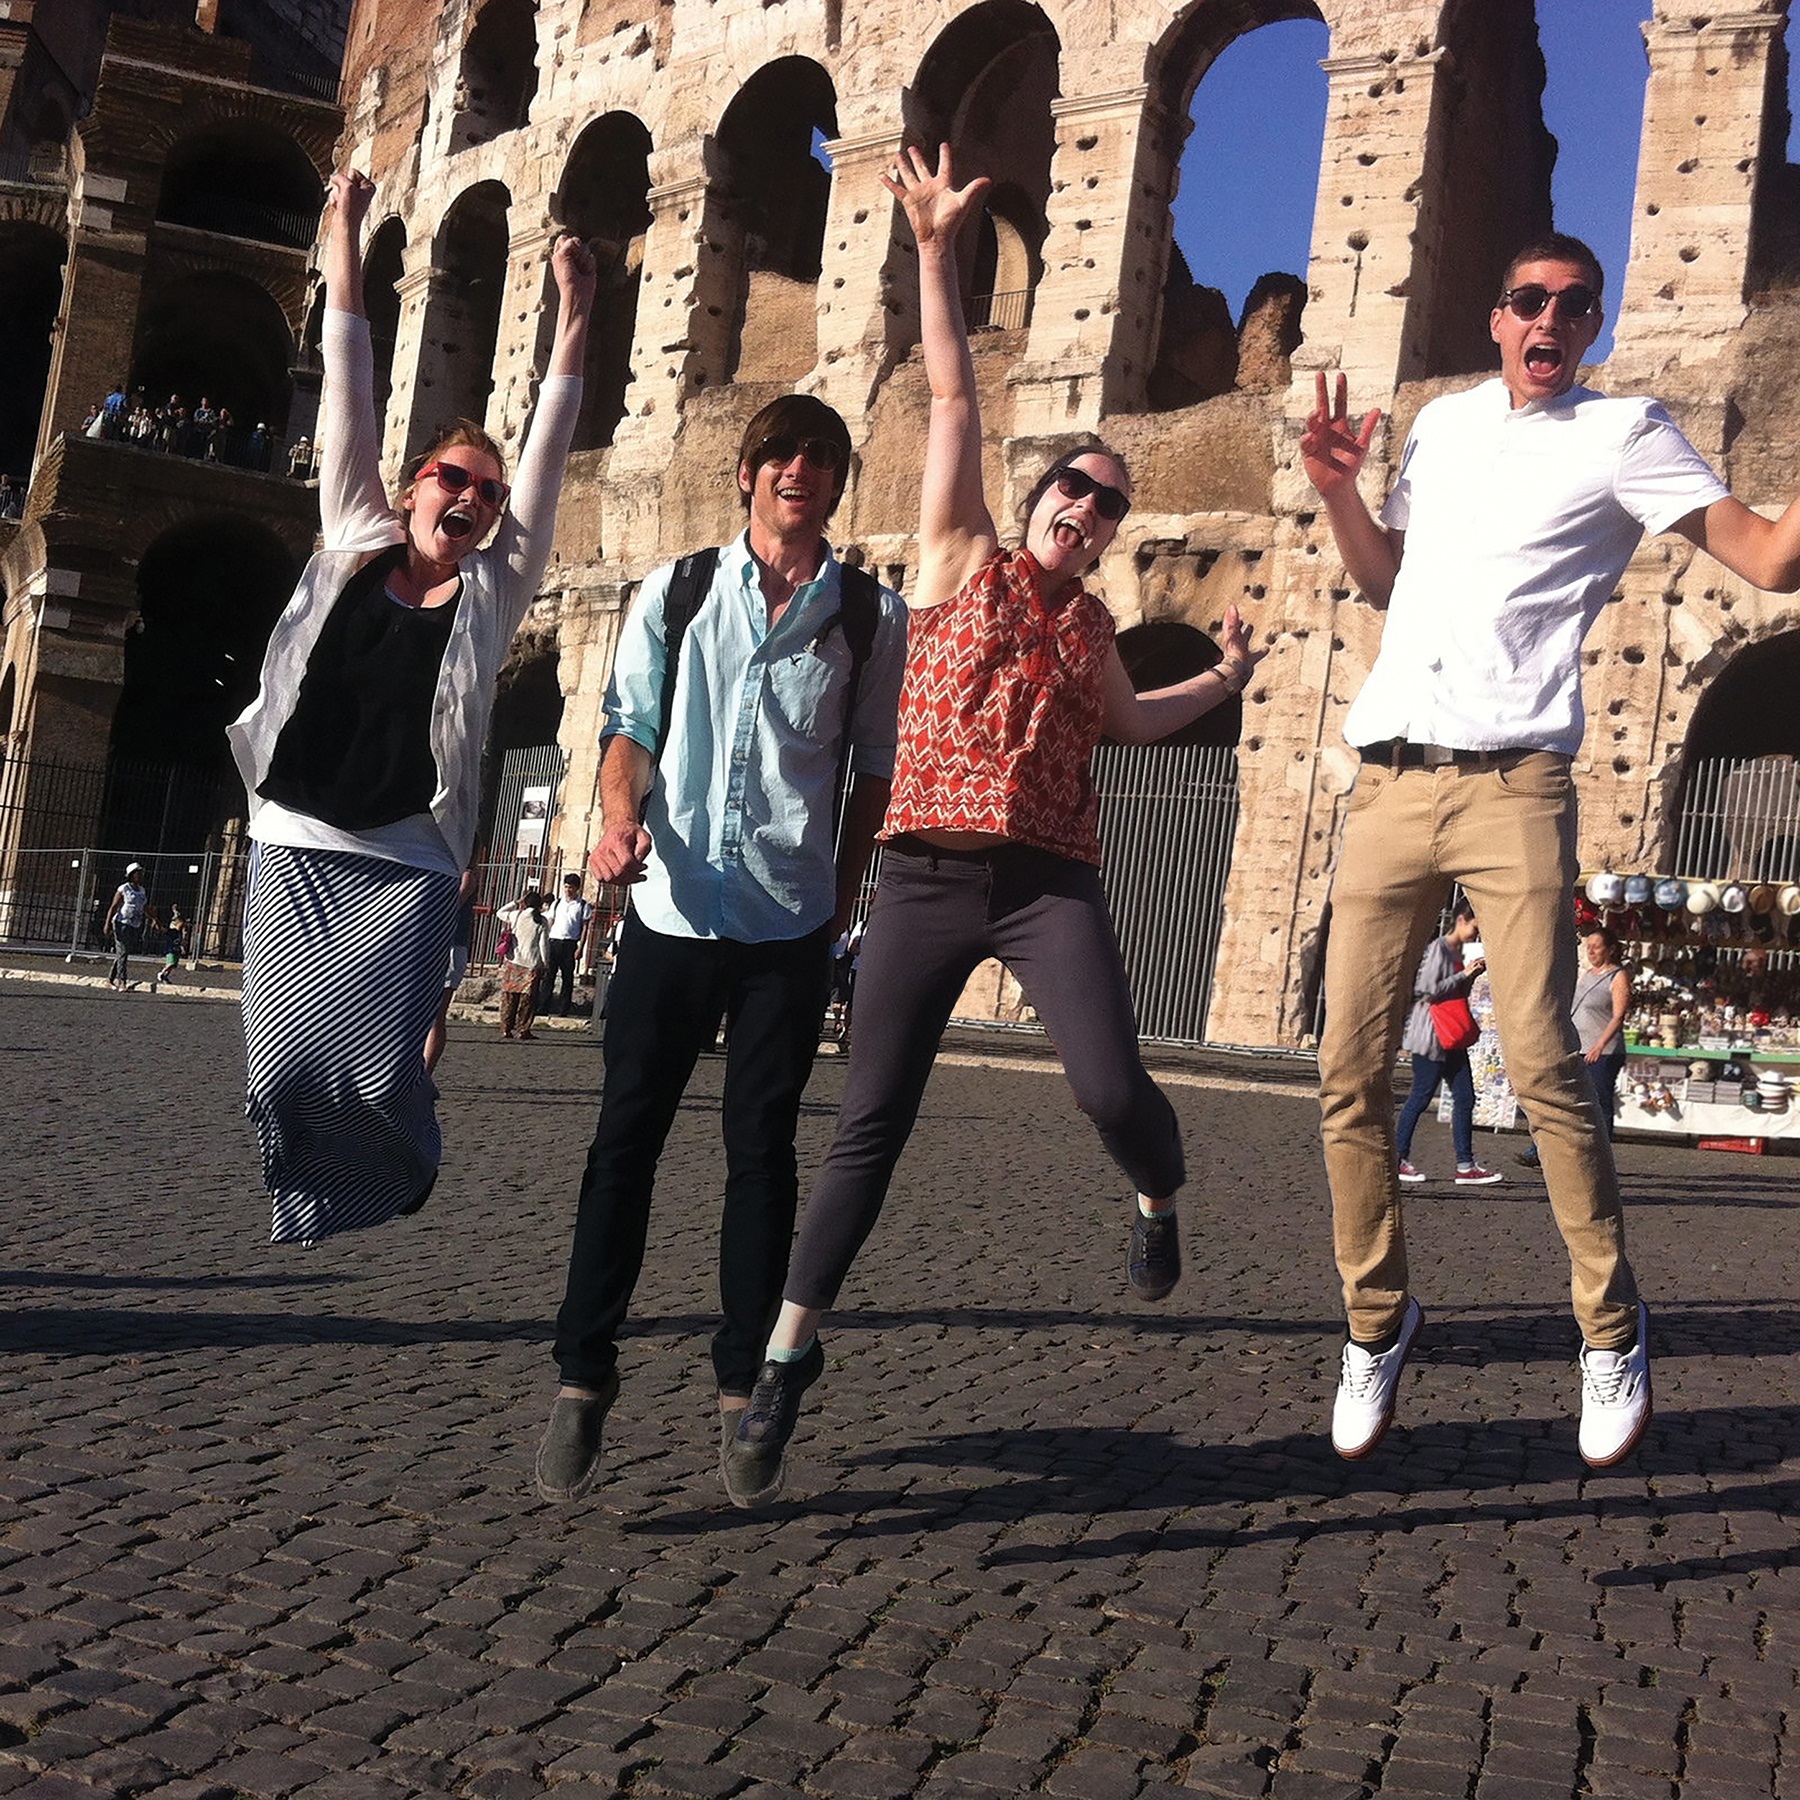 GRCC Students jumping in front of the Coliseum in Rome